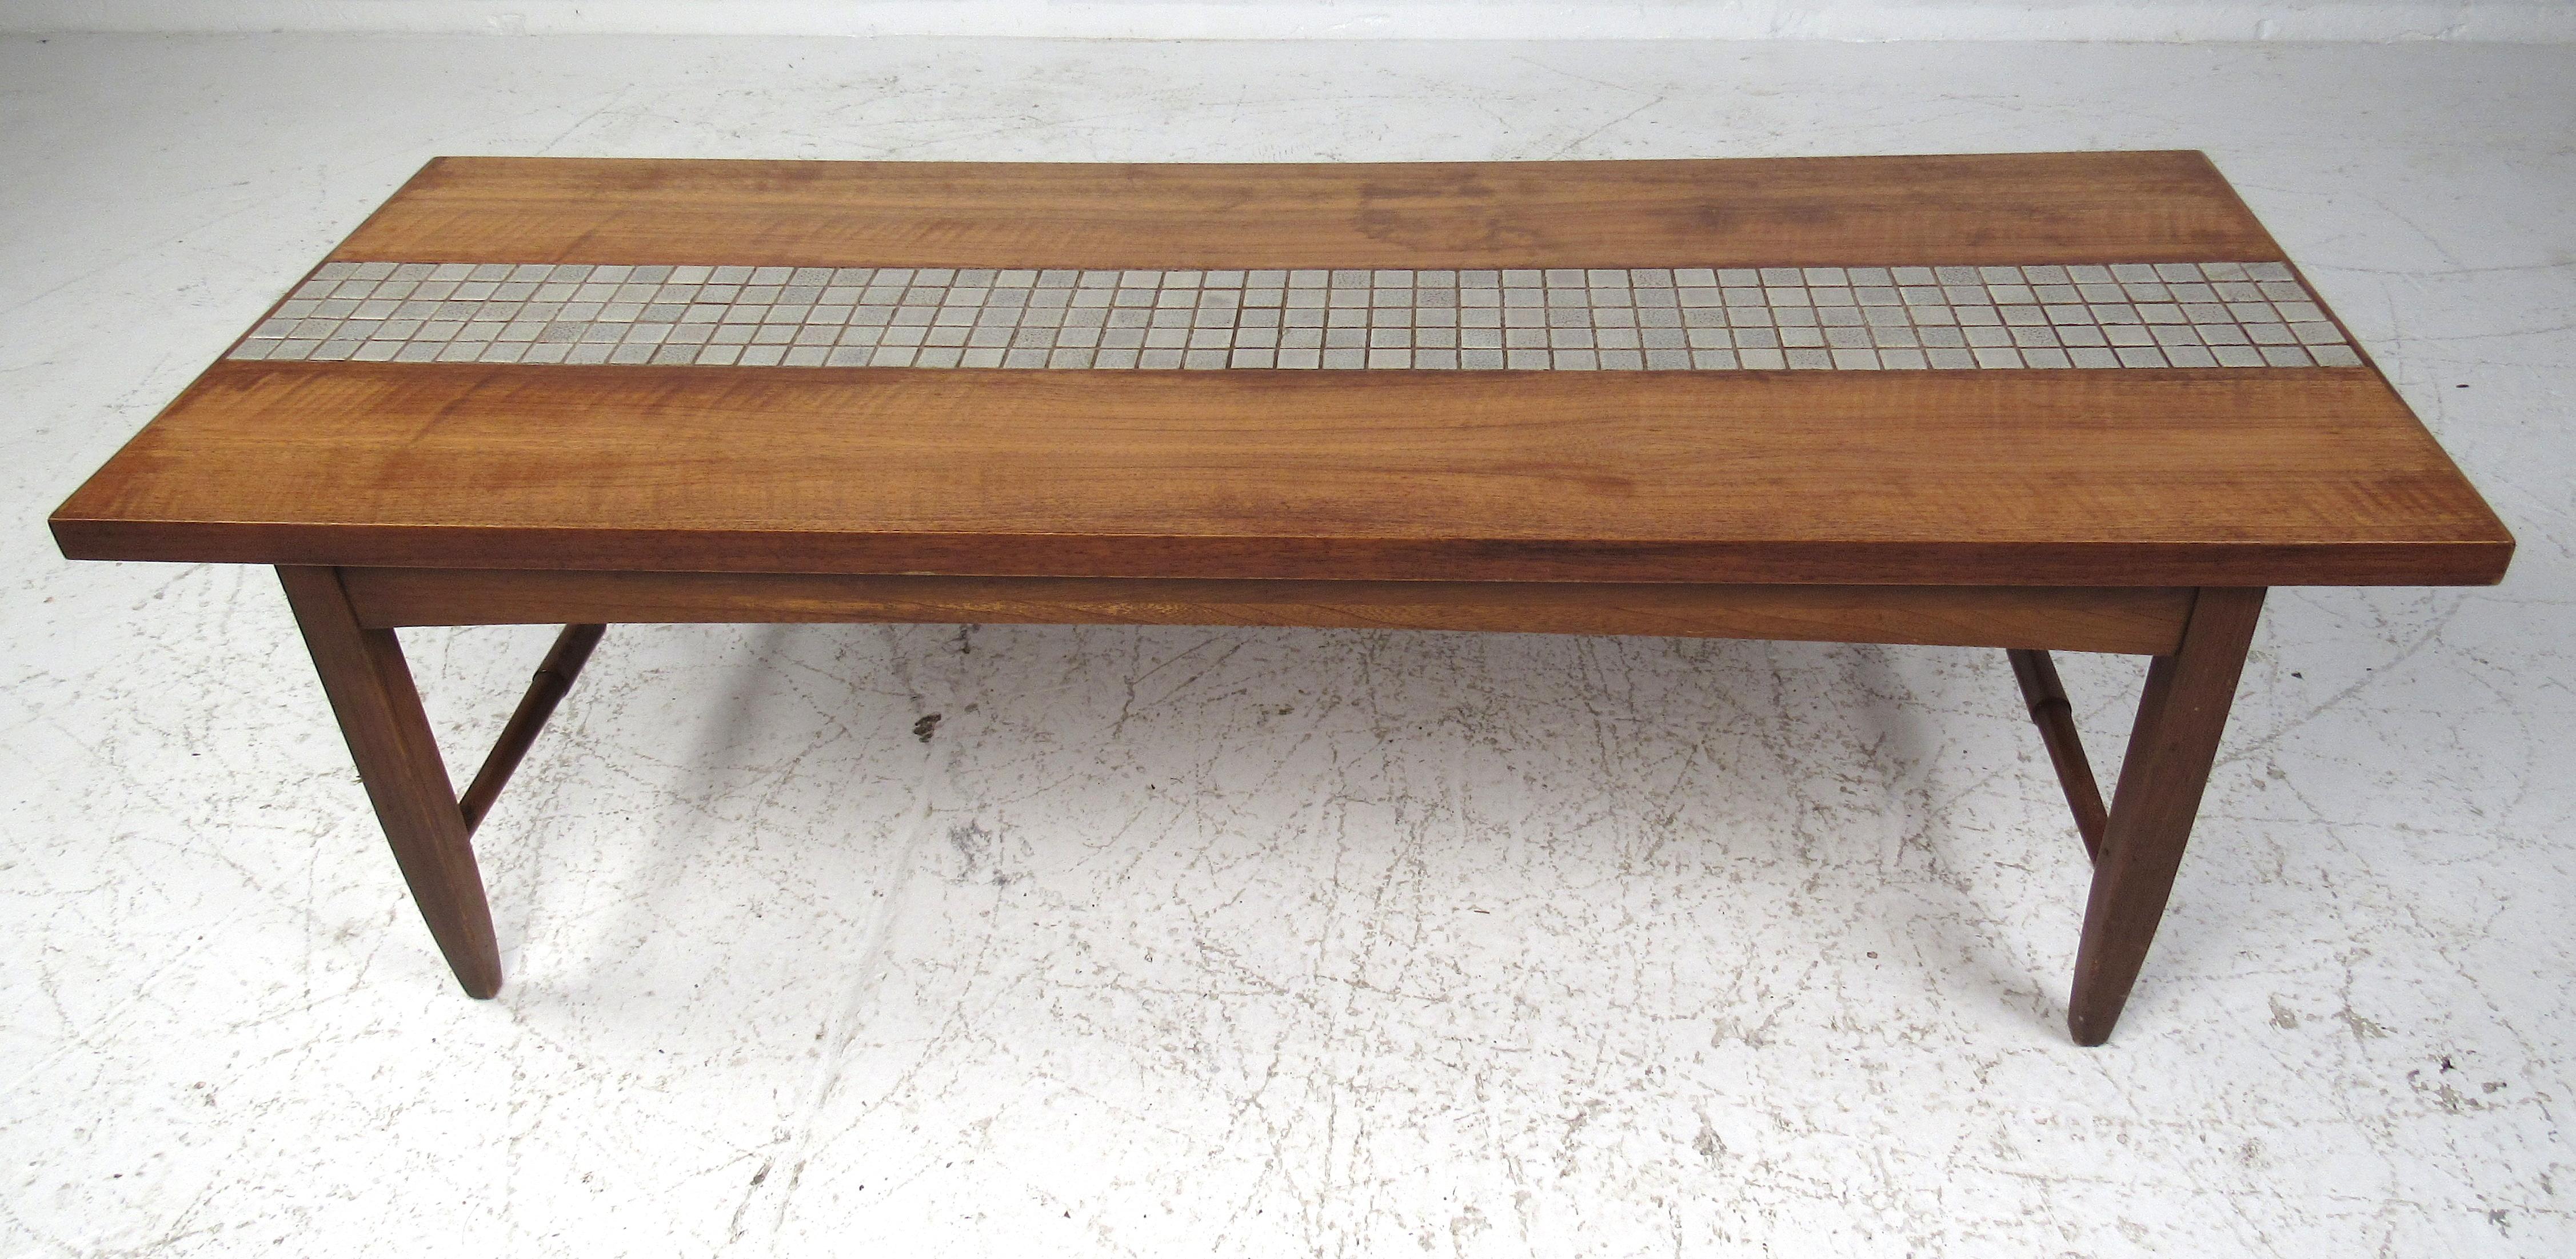 Solid walnut construction with imported Capri grey tile inlay, the Monte Carlo table provides an eye-catching midcentury look in any living room decor. Please confirm item location (NY or NJ) with dealer.